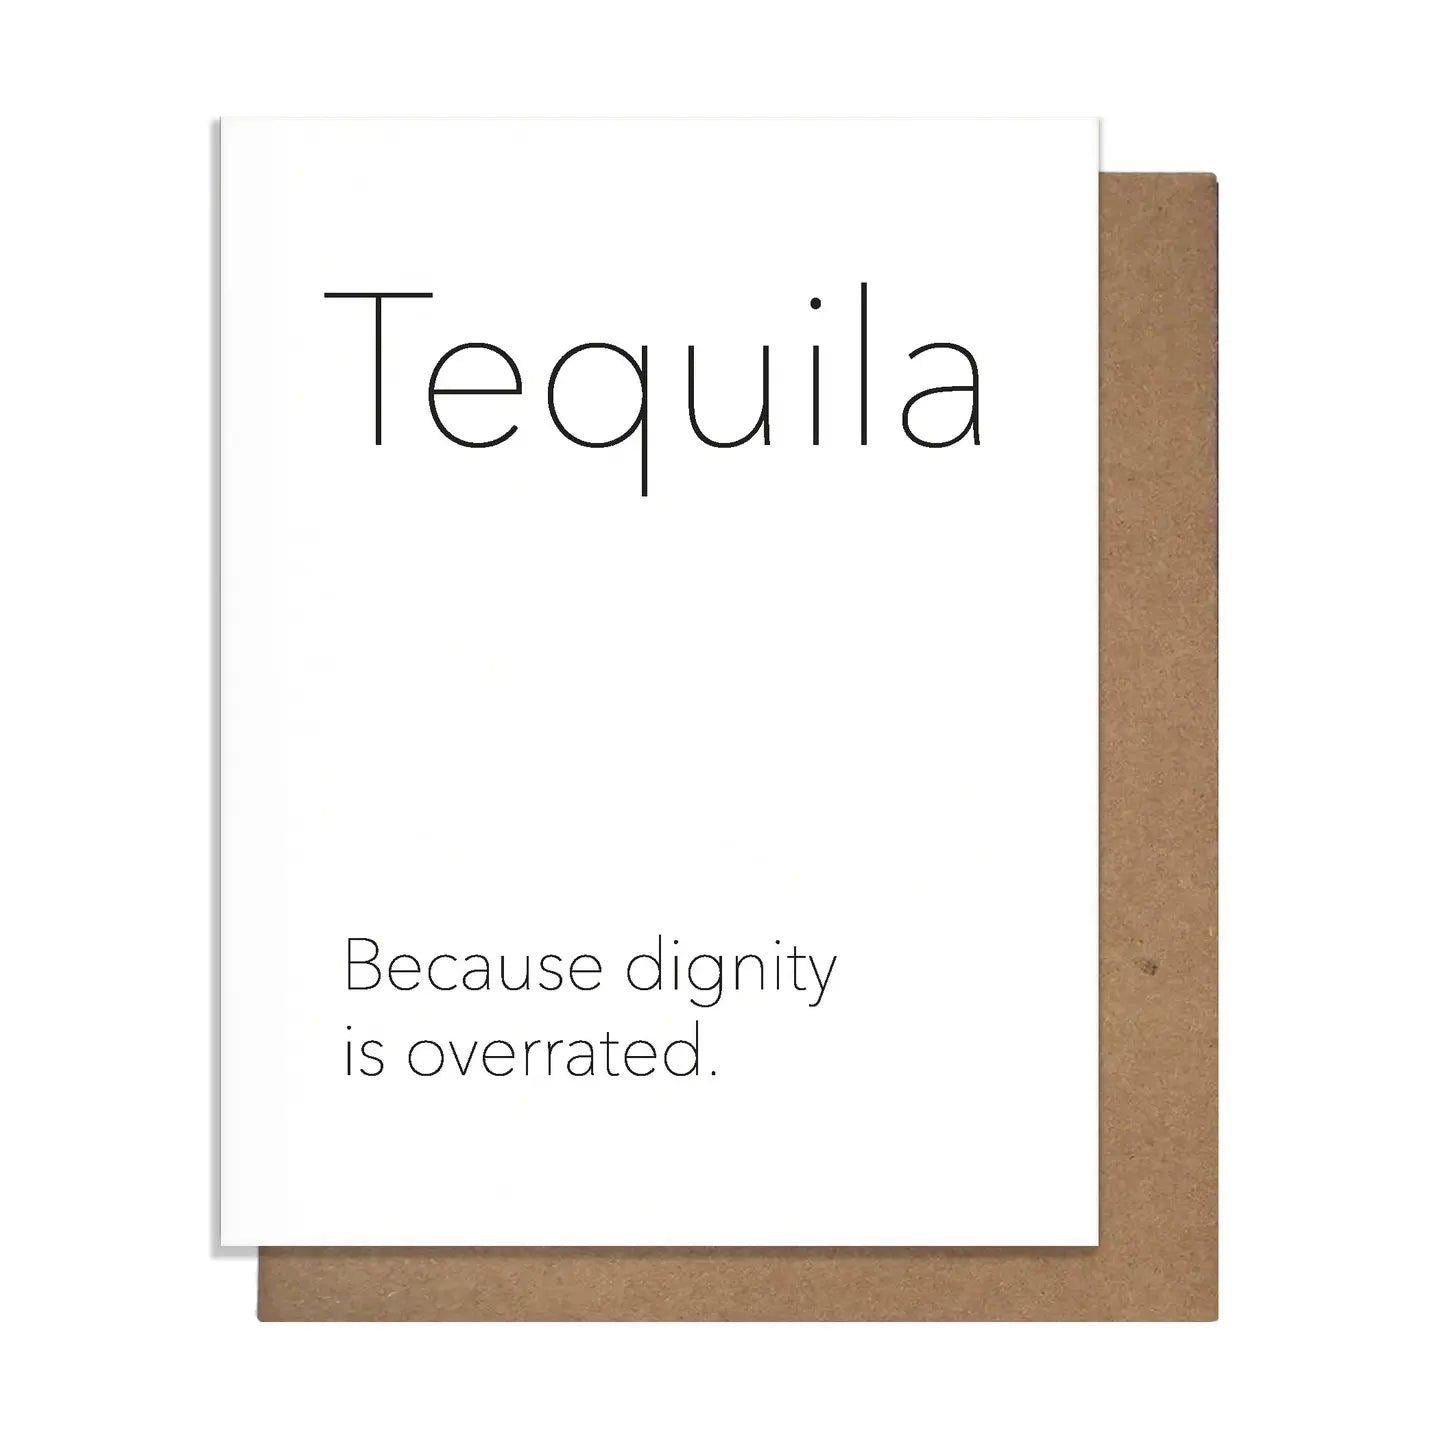 Tequila Dignity